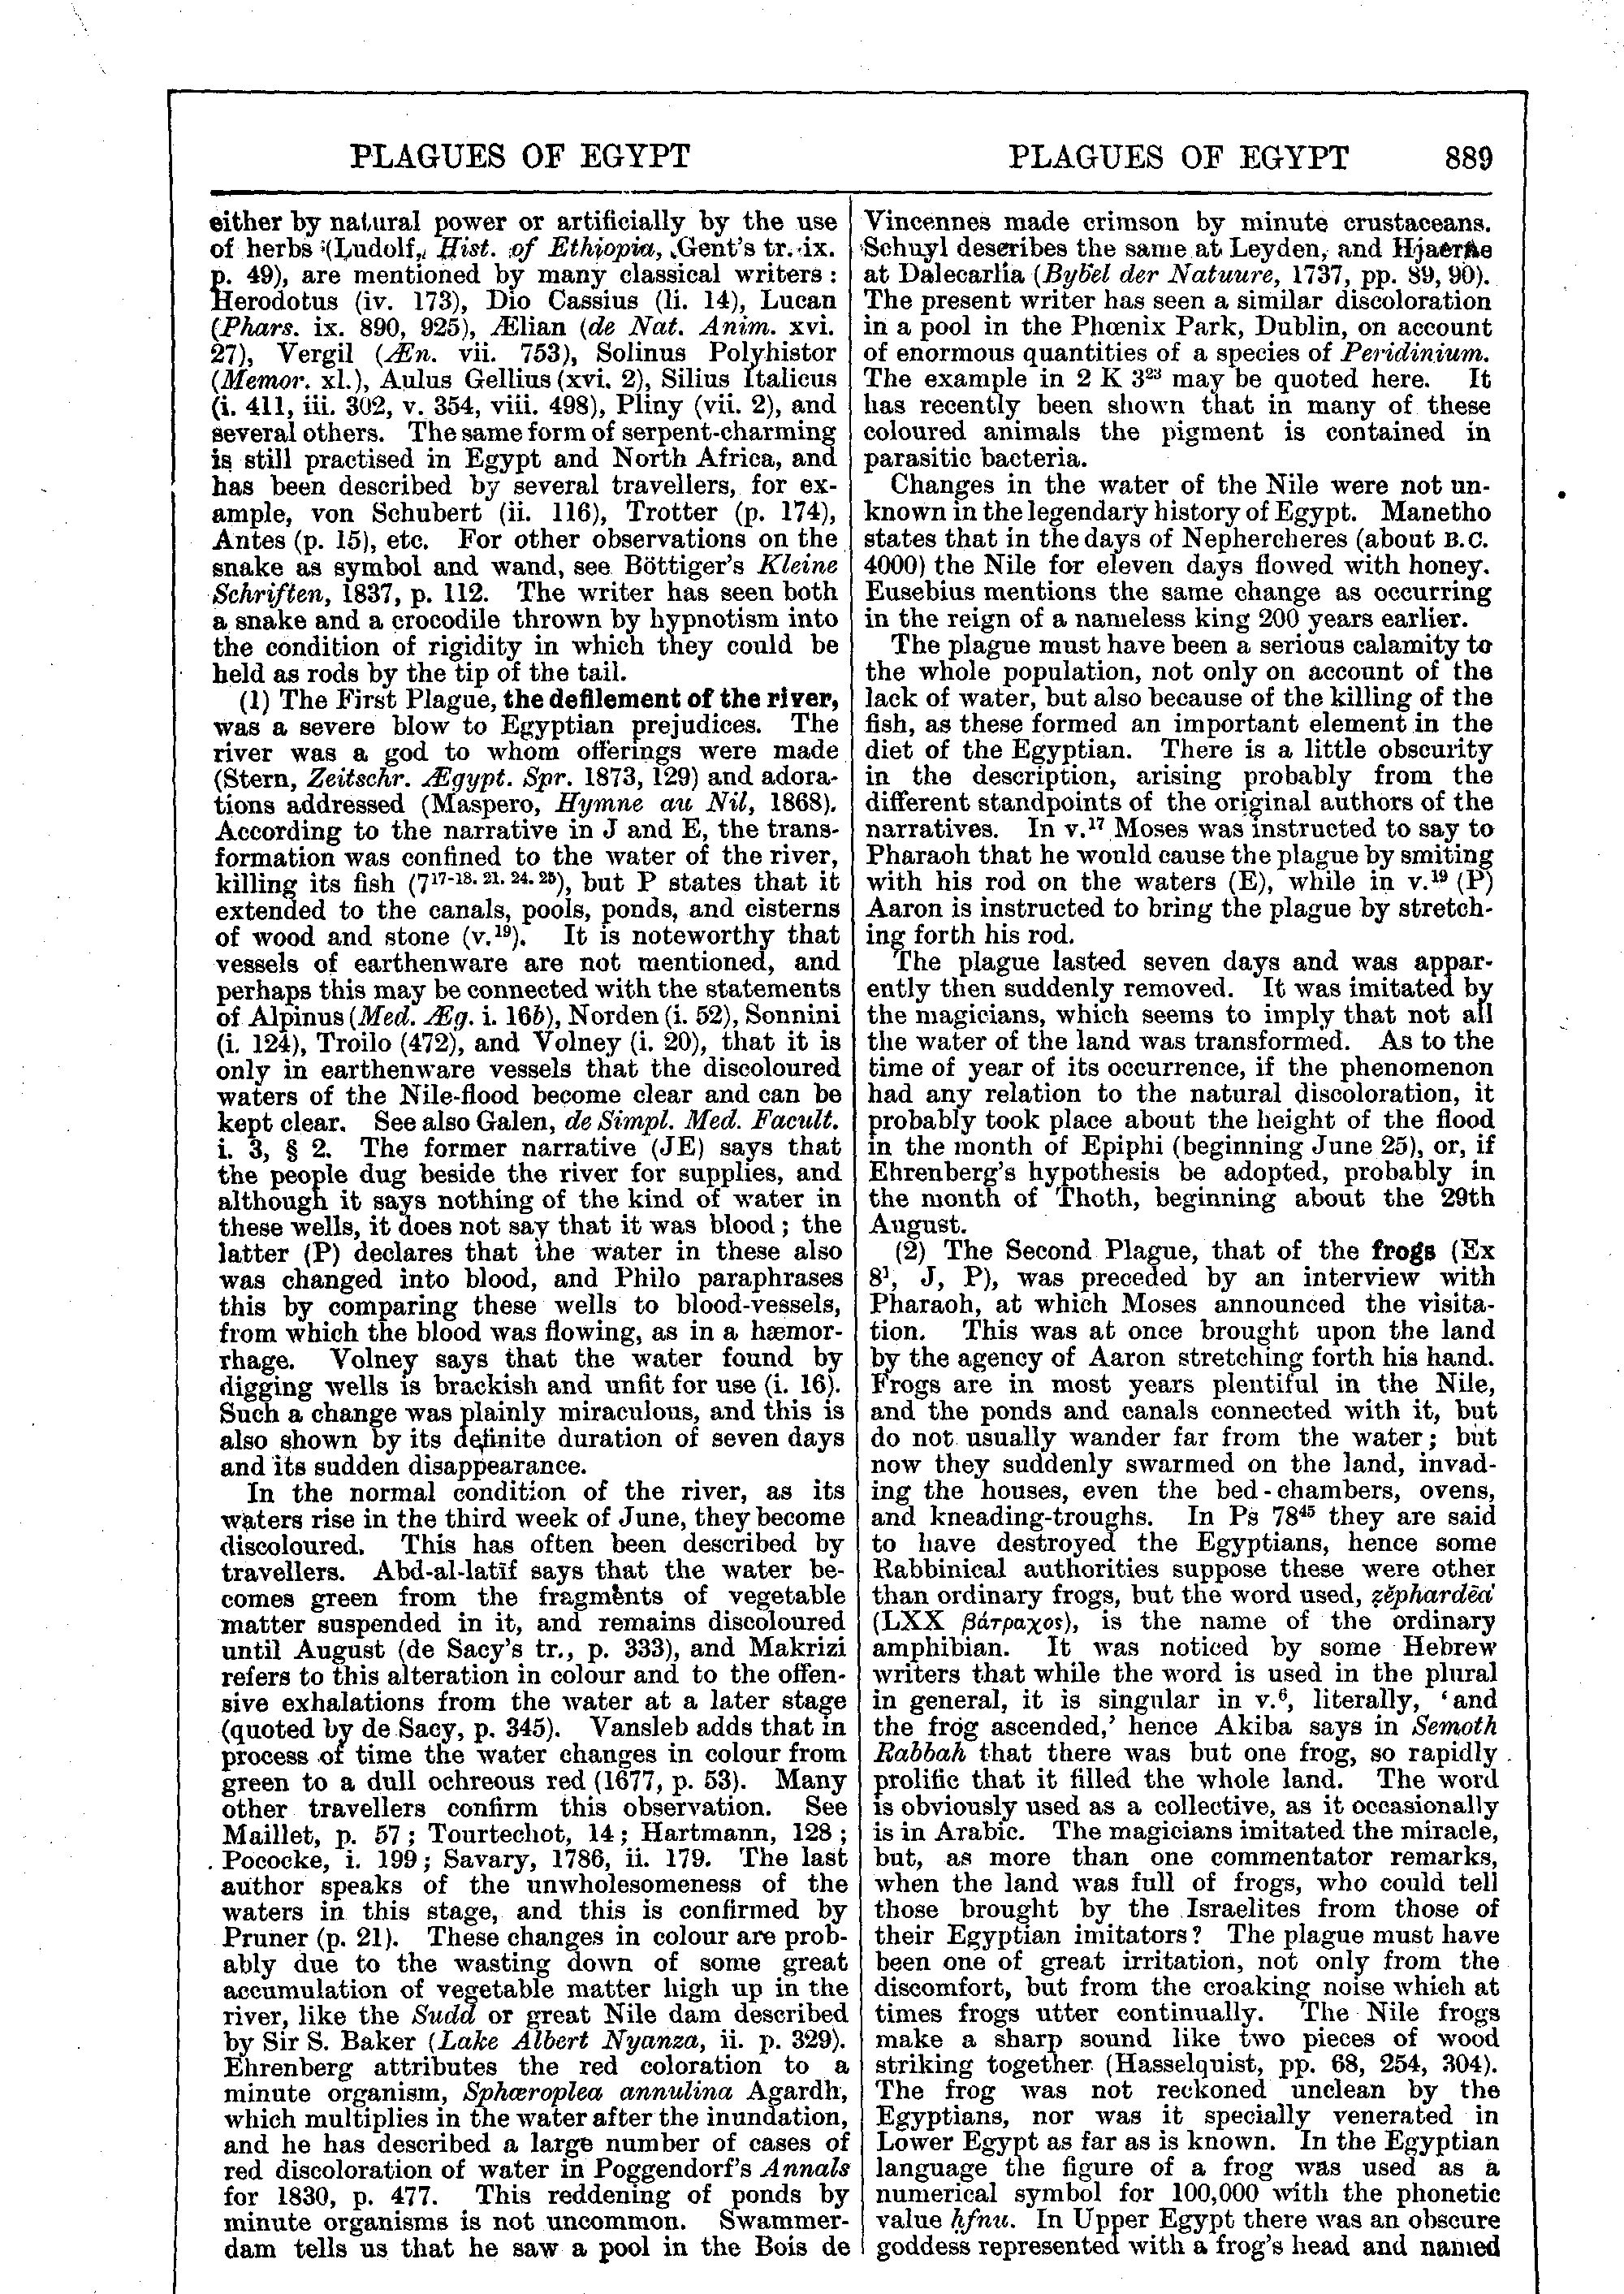 Image of page 889